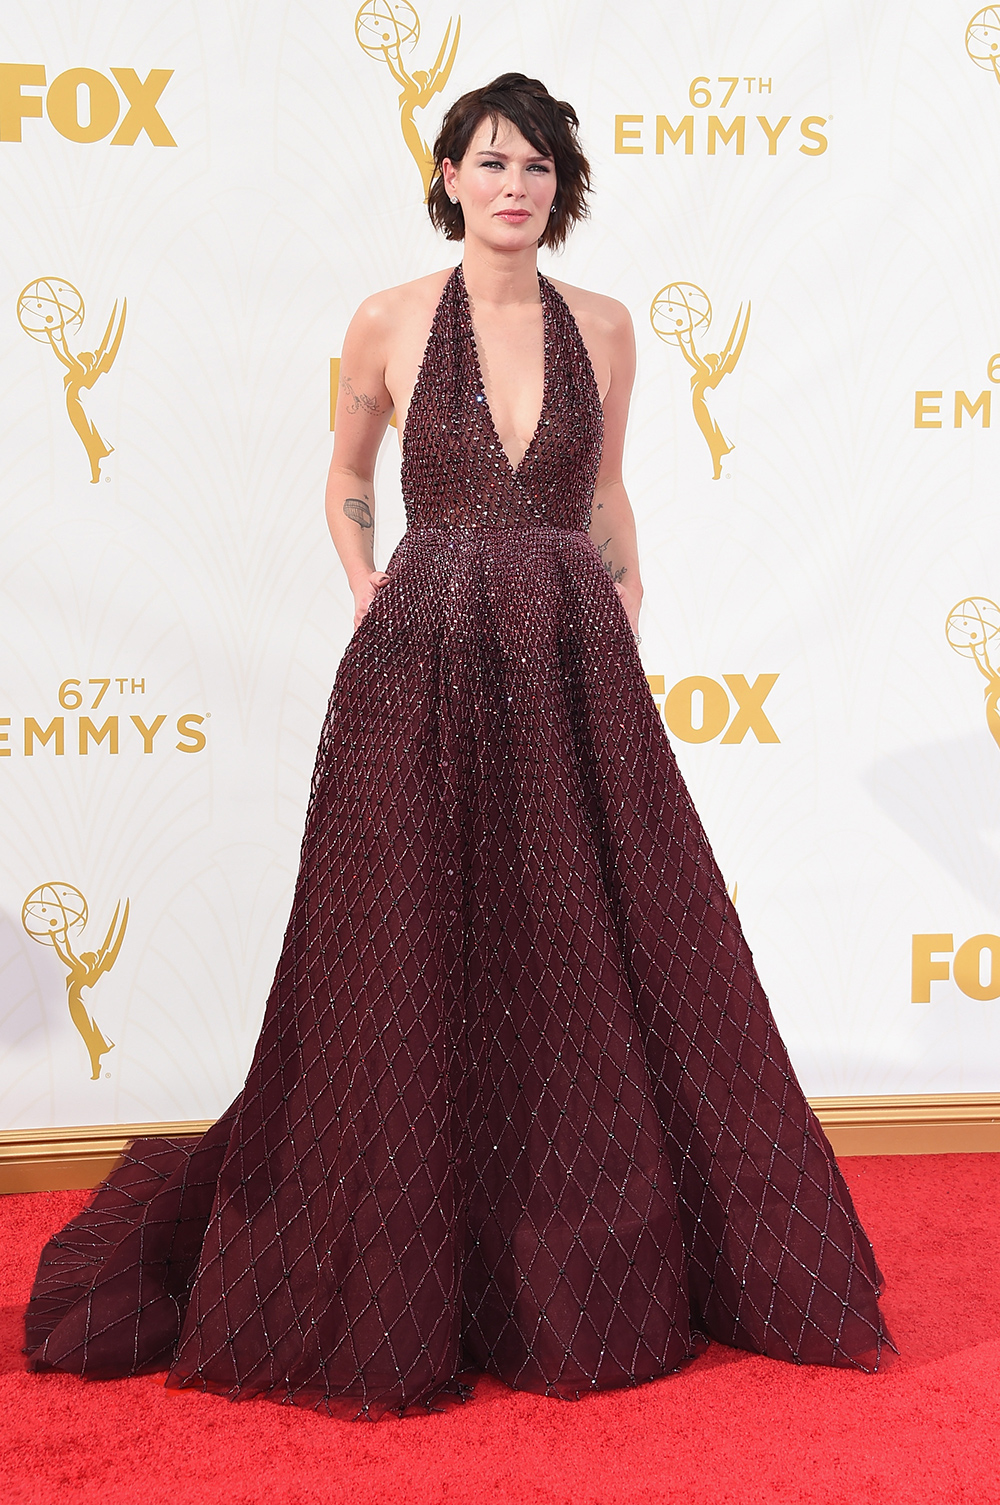 Lena Headey wears Zuhair Murad to the 67th Annual Primetime Emmy Awards. Photo / Getty Images